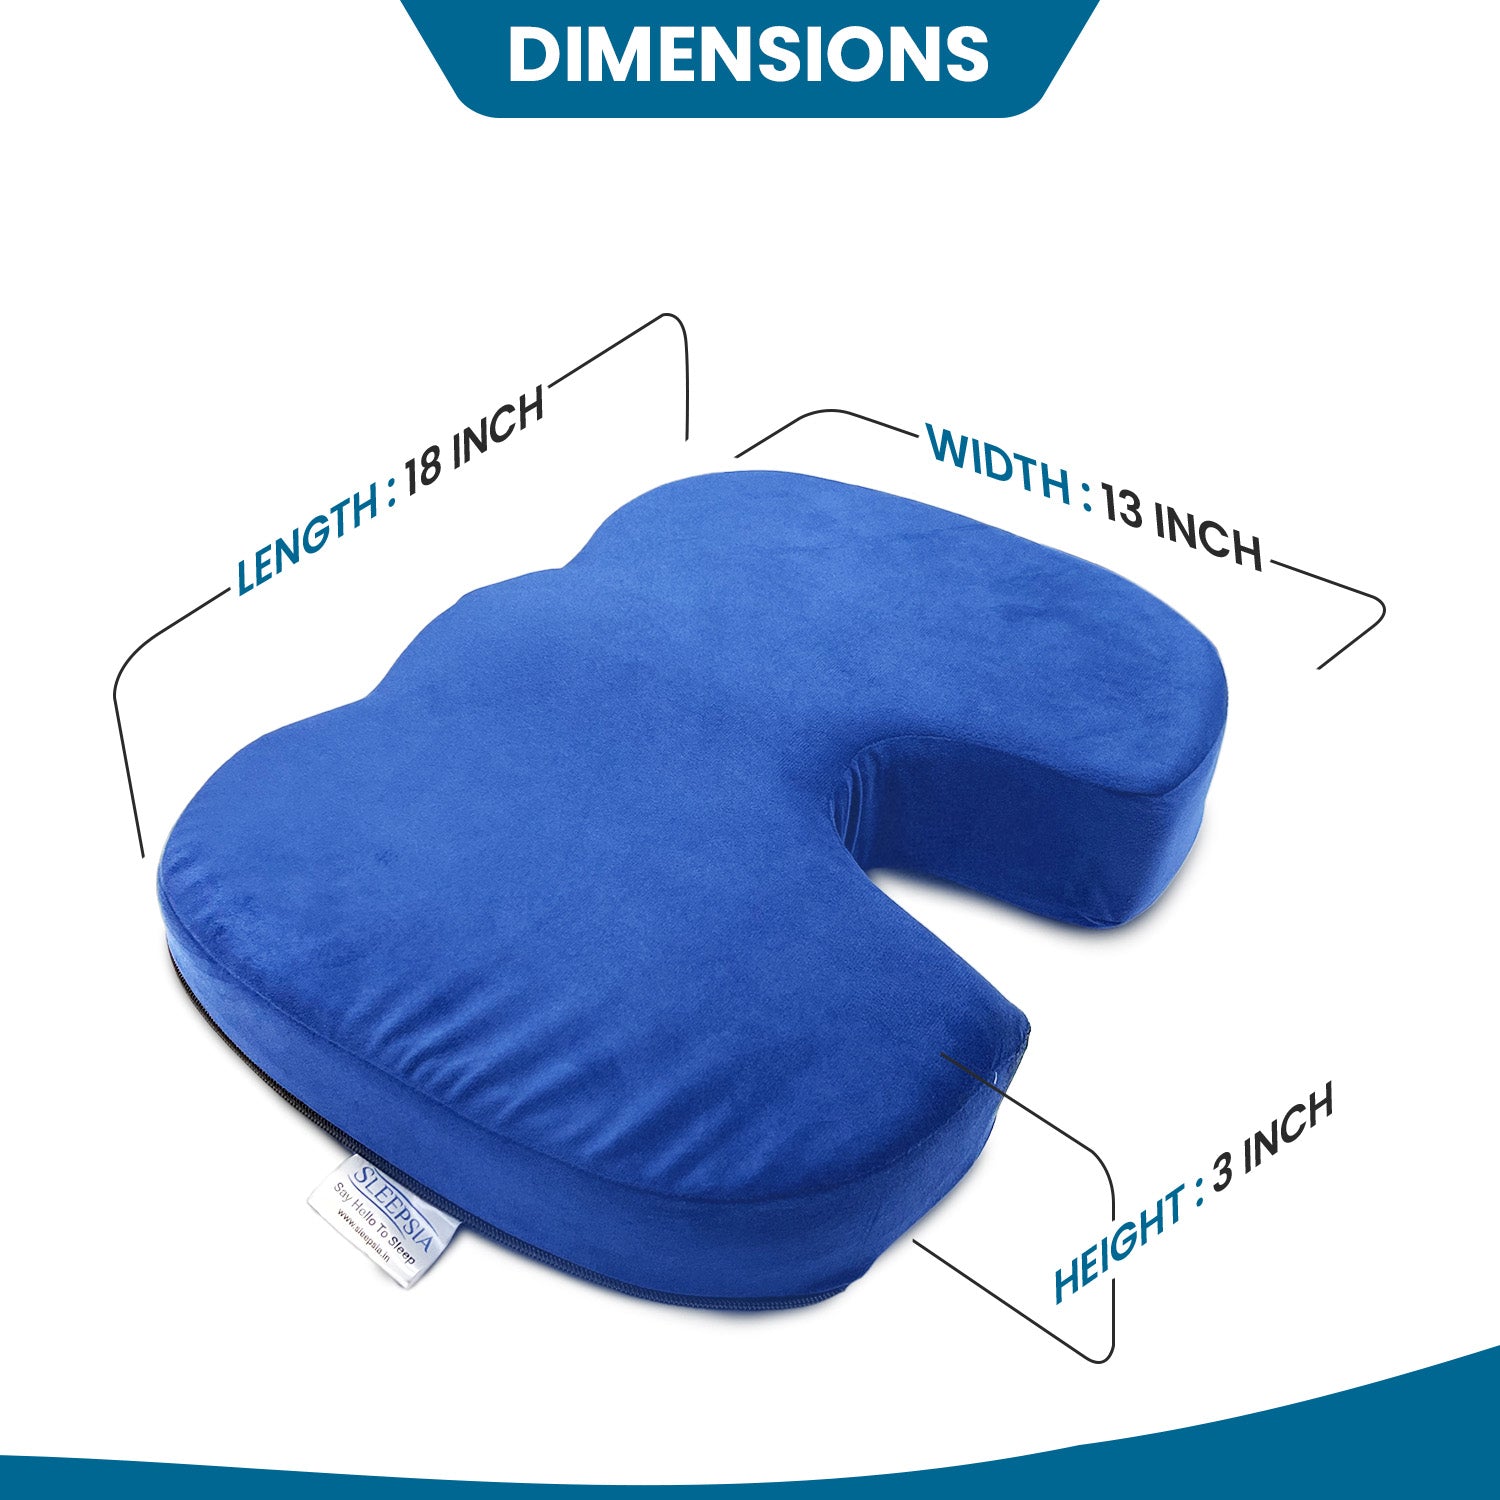 Orthopedic Memory Foam U-Shaped Coccyx Seat Cushion with Ventilated Cooling Gel for Tailbone, Sciatica & Back Pain Relief